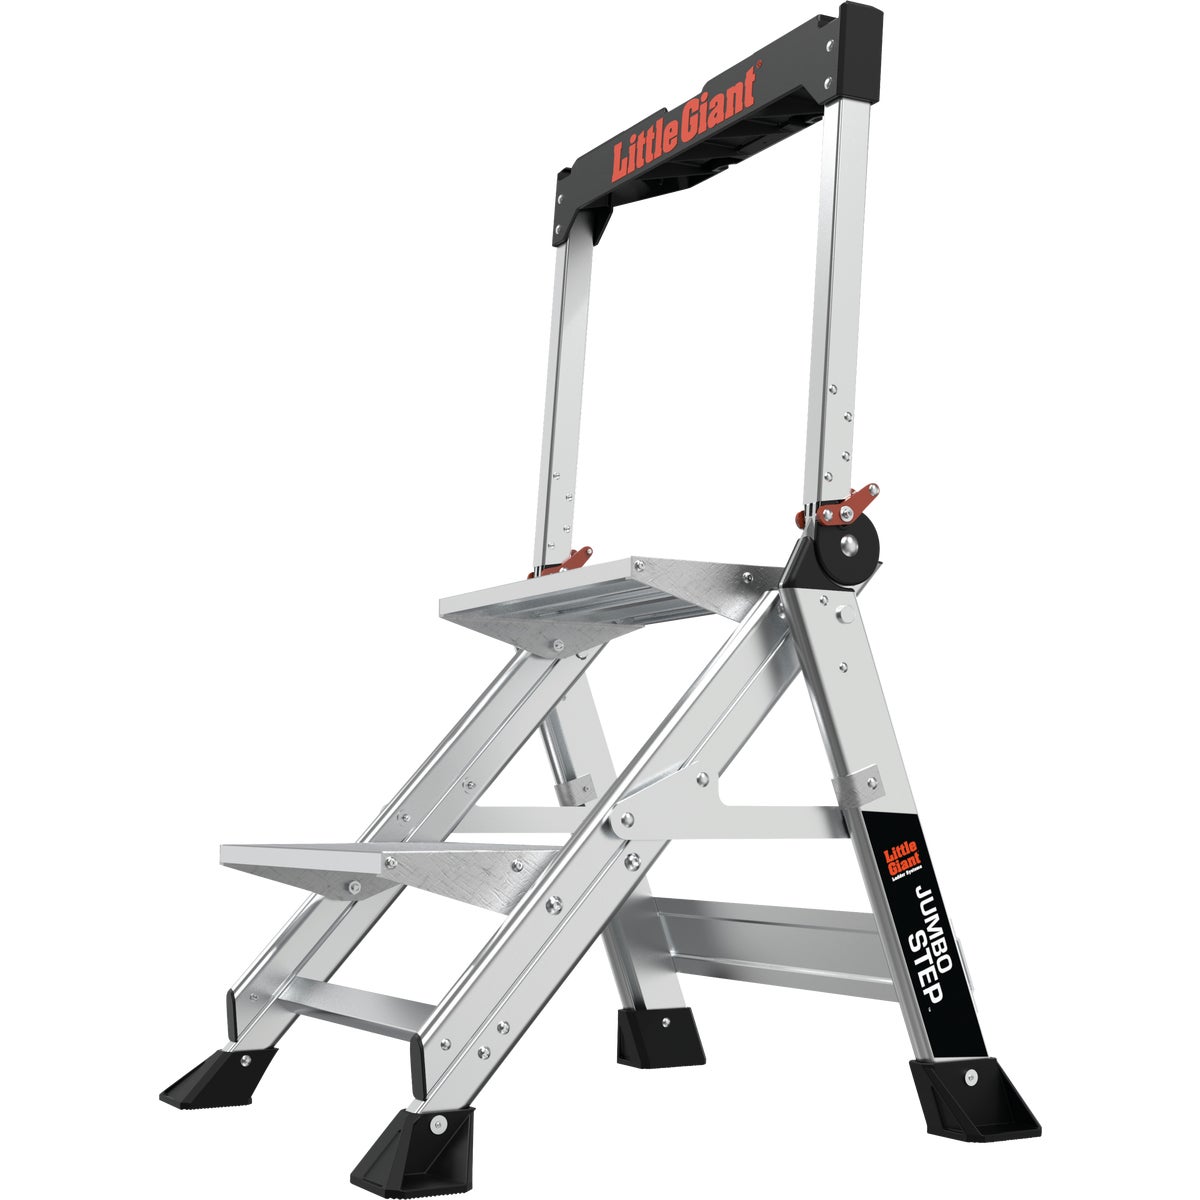 Little Giant Jumbo Step 42 In. Aluminum Step Ladder with 375 Lb. Load Capacity Type 1AA Ladder Rating 